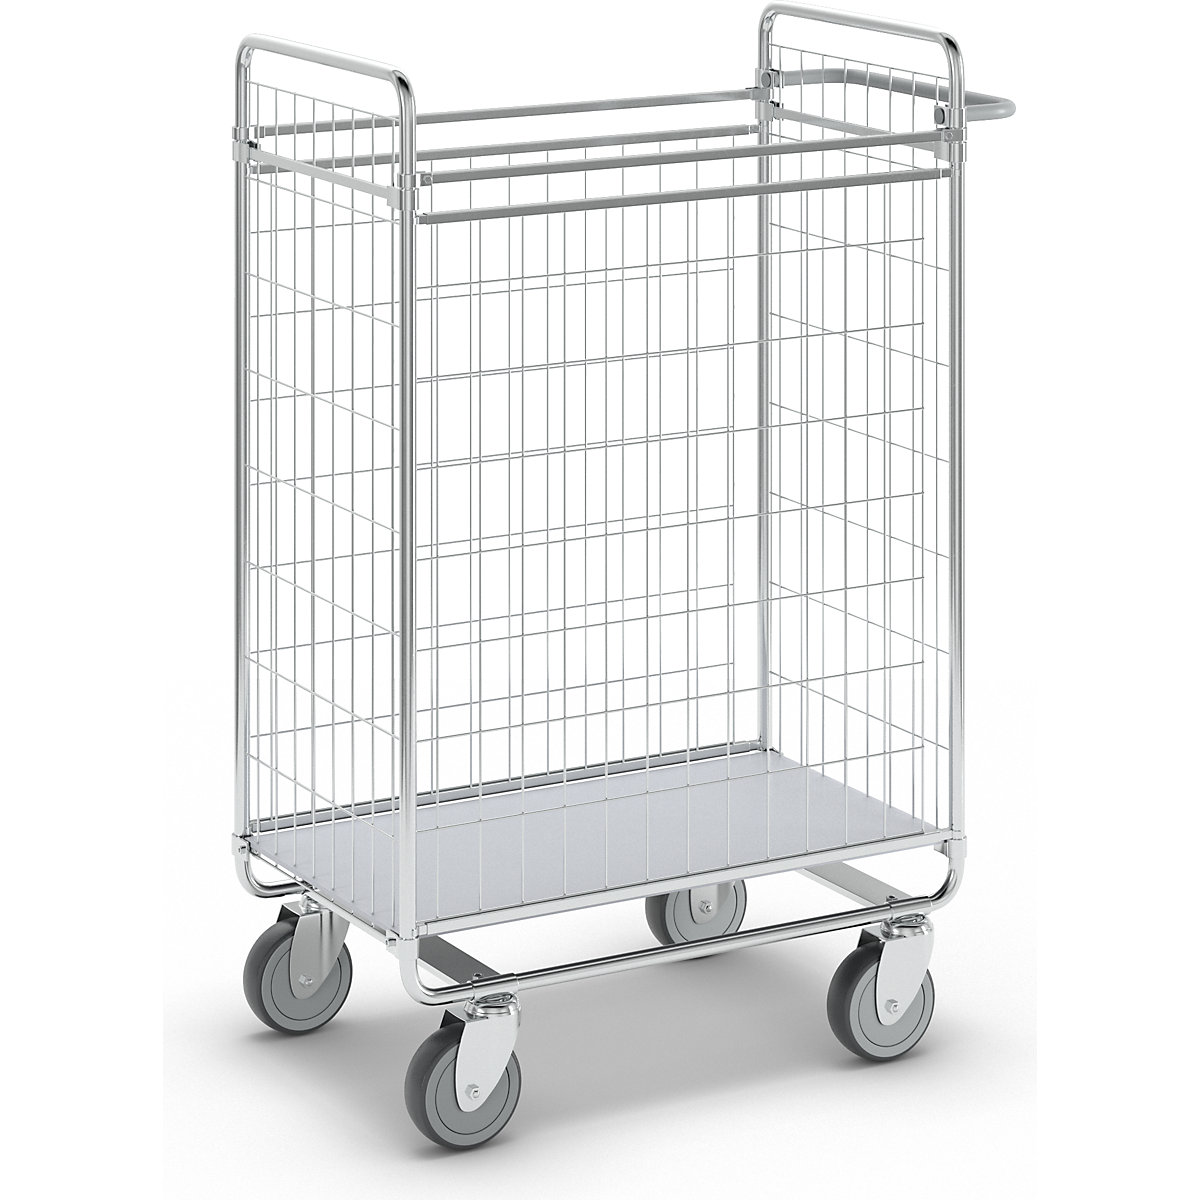 SERIES 100 four-sided trolley – HelgeNyberg, max. load 100 kg, LxWxH 800 x 460 x 1120 mm-1